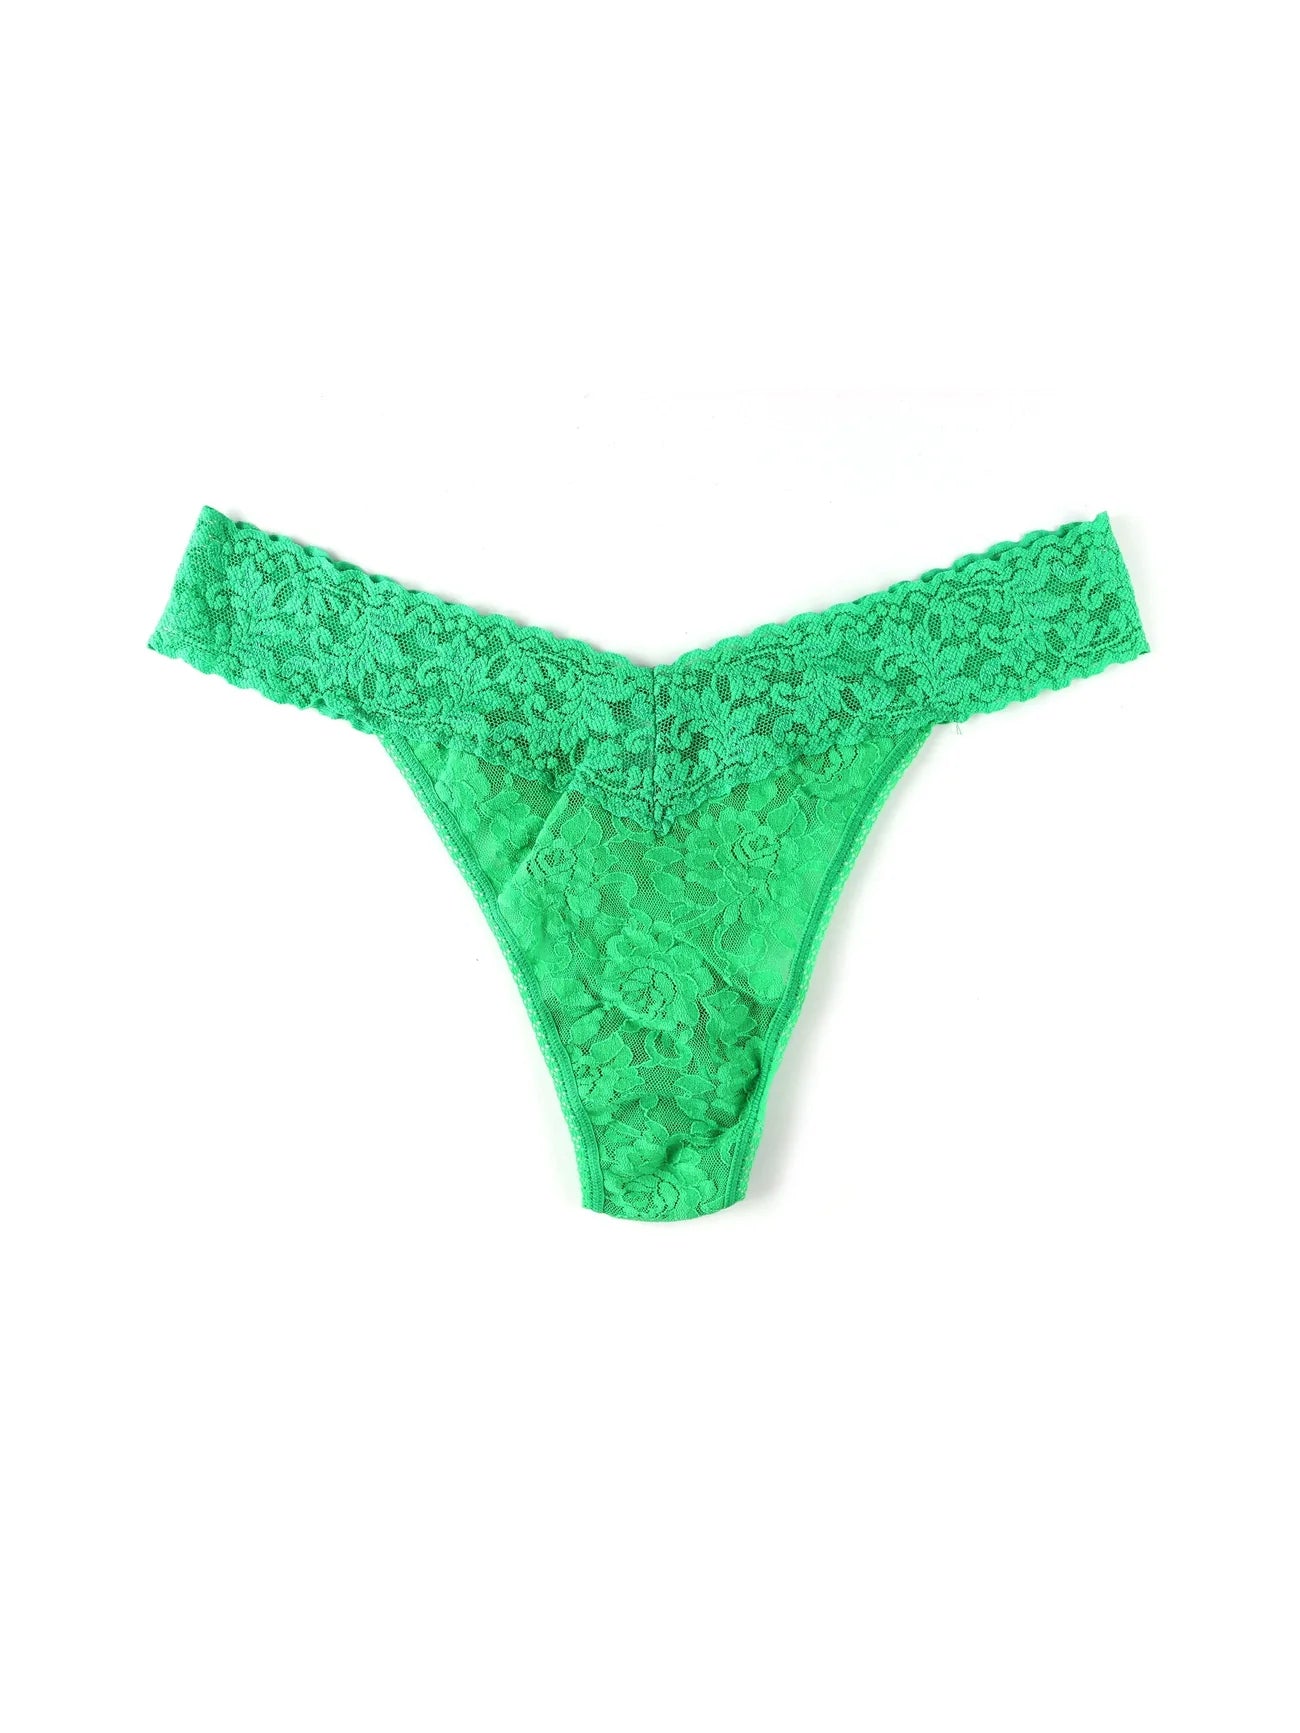 Hanky Panky Signature Lace Original Rise Thong-Packaged 4811p